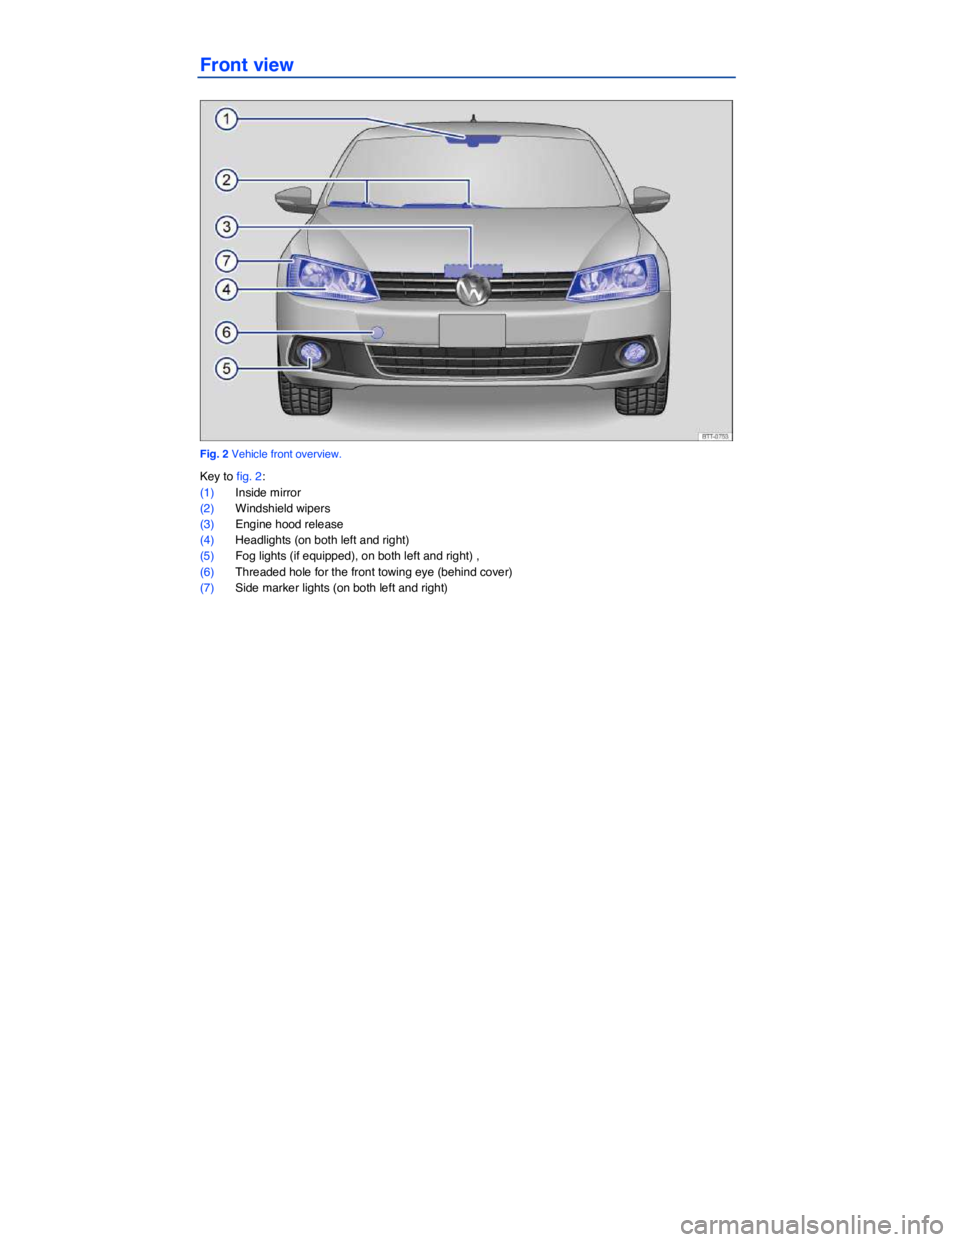 VOLKSWAGEN JETTA 2.5 SE 2012  Owners Manual  
Front view 
 
Fig. 2 Vehicle front overview. 
Key to fig. 2: 
(1) Inside mirror  
(2) Windshield wipers  
(3) Engine hood release  
(4) Headlights (on both left and right)  
(5) Fog lights (if equip